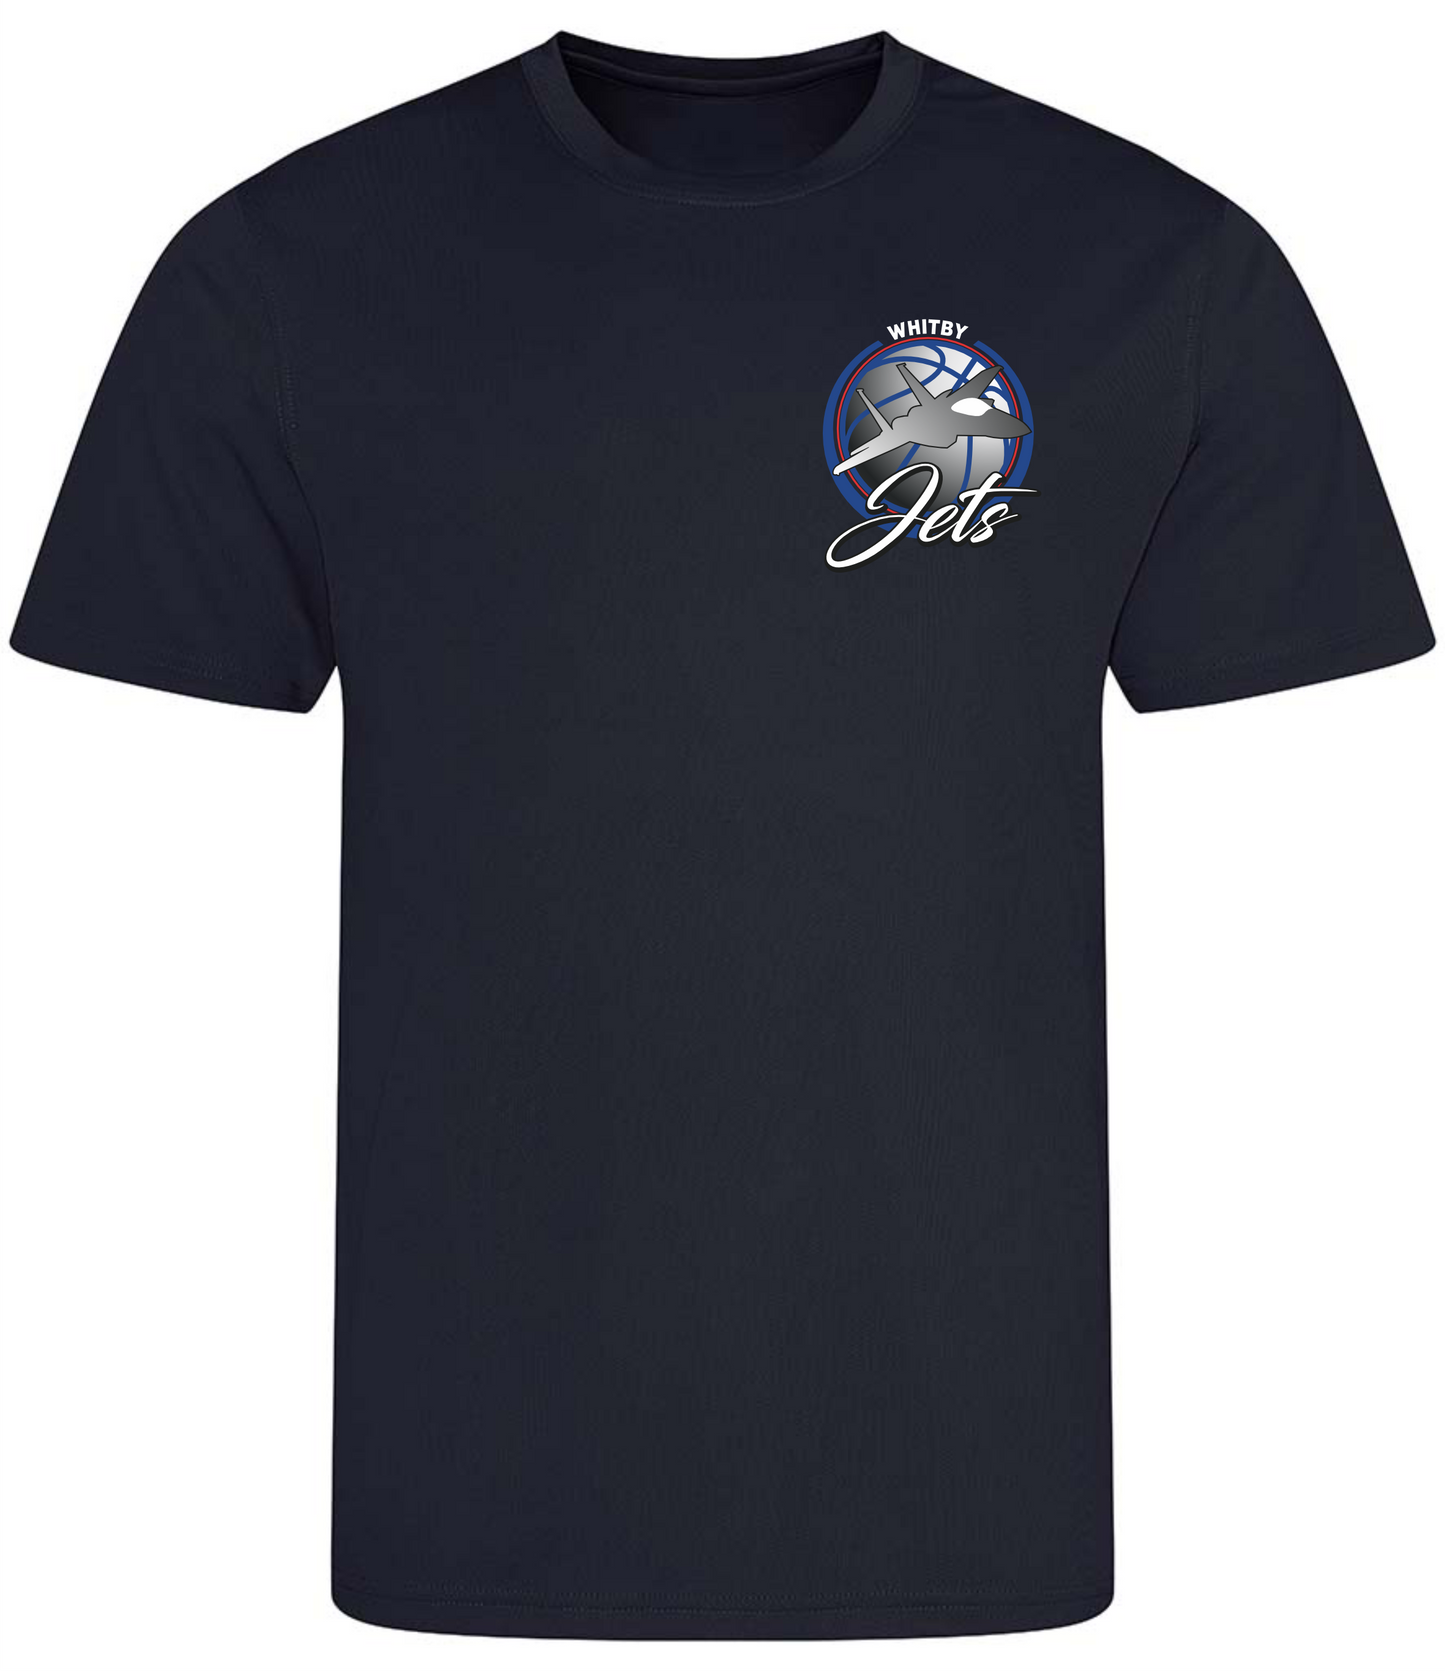 Whitby Jets Kids Cool T-Shirt | French Navy